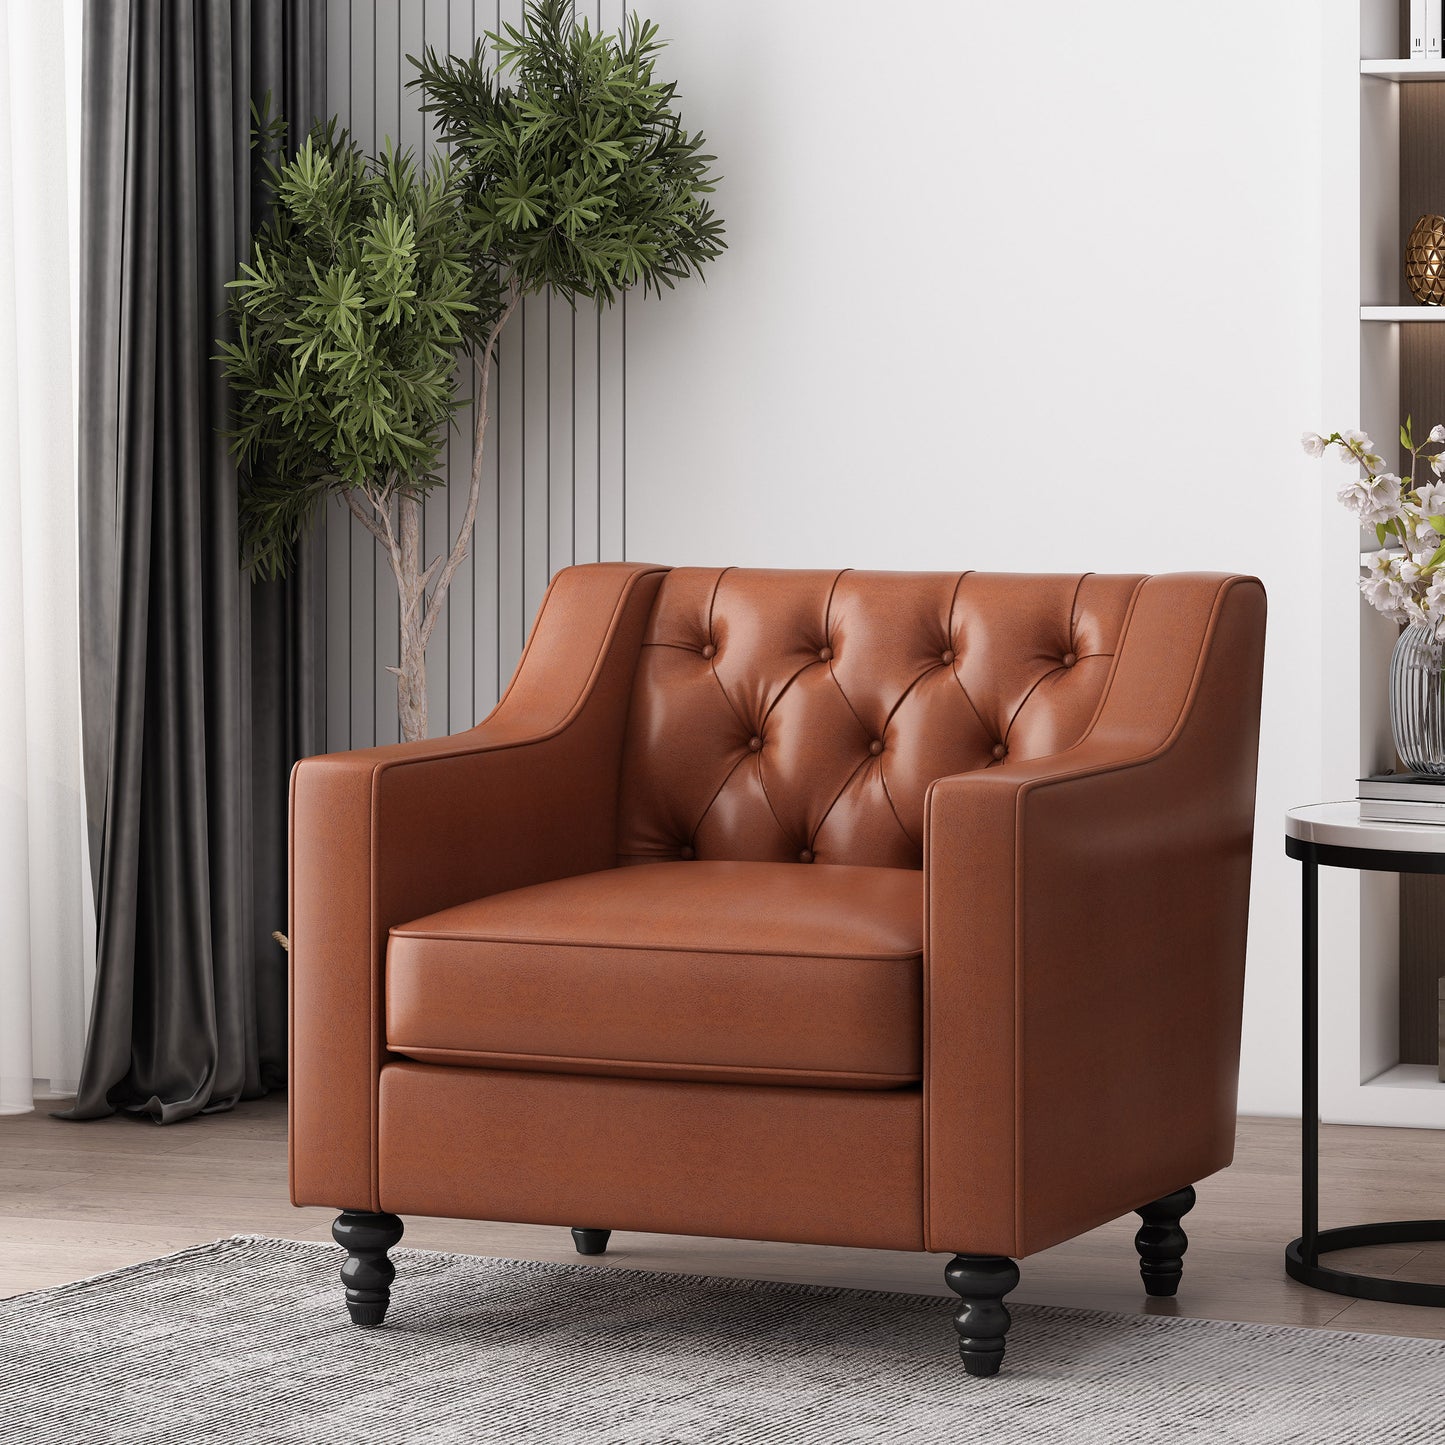 Bluewater Contemporary Tufted Club Chair